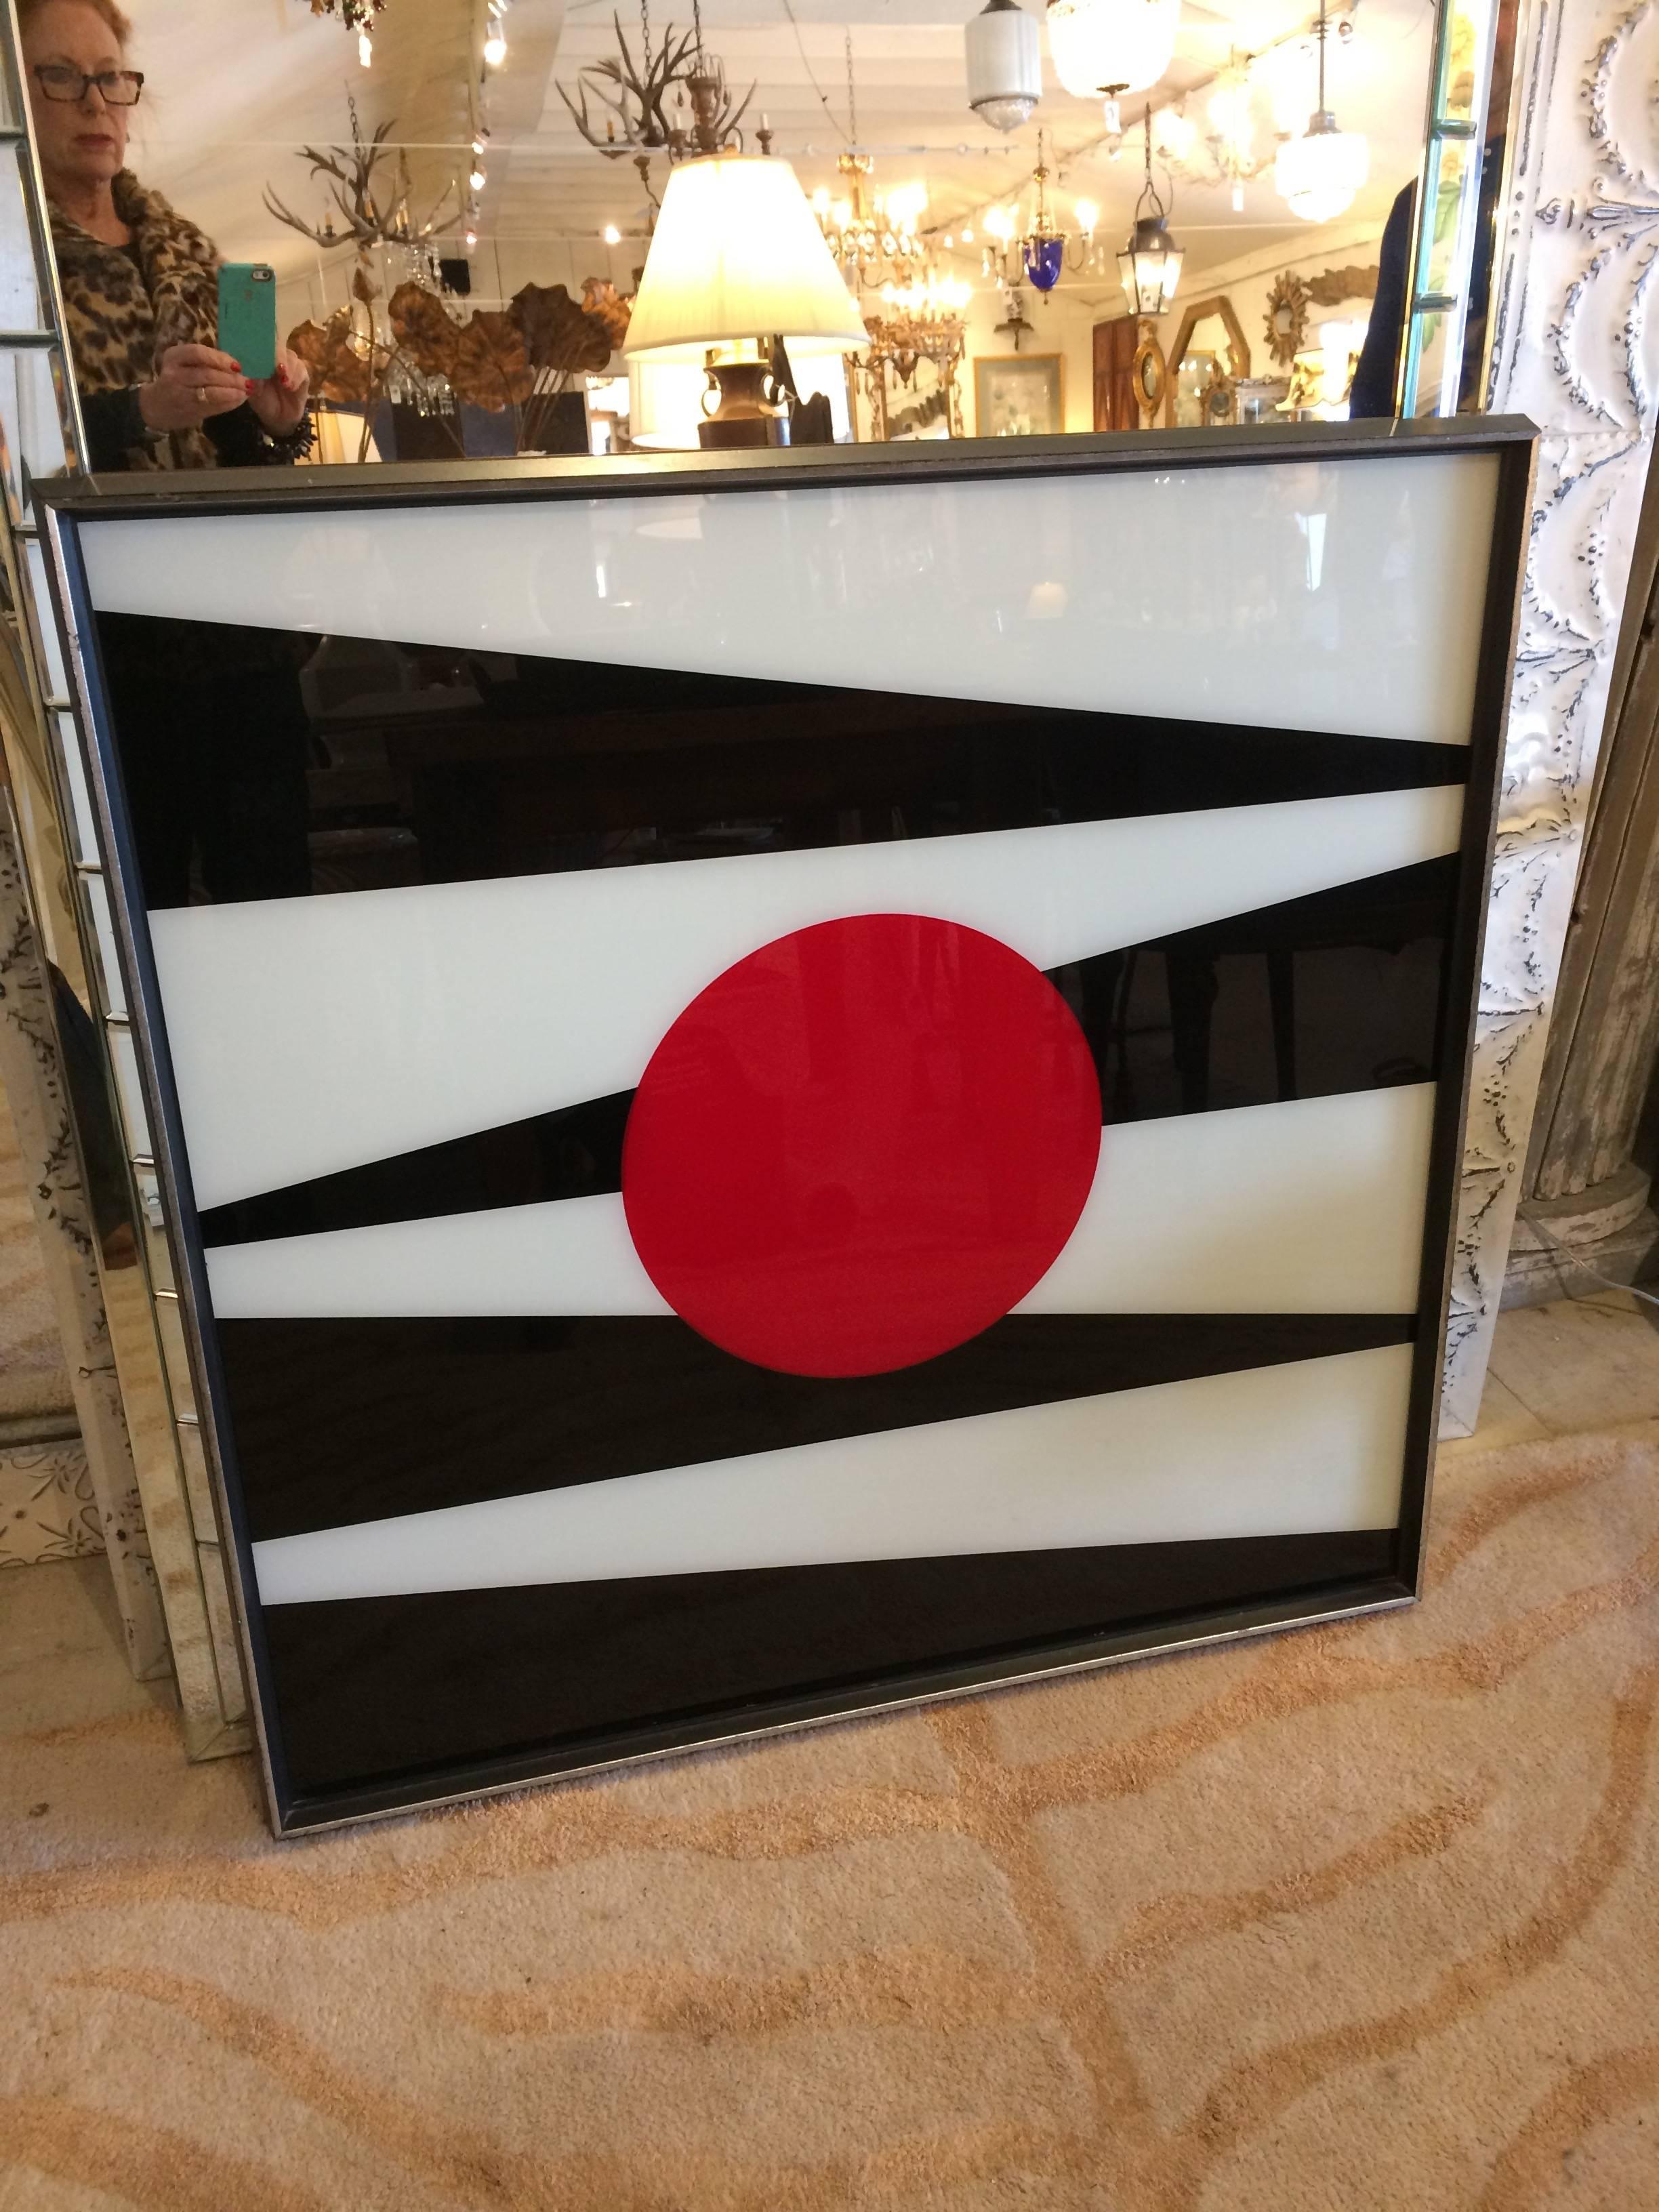 Very graphic Op Art style reverse painting on glass having a bold geometric design in black and white with a central red circle.